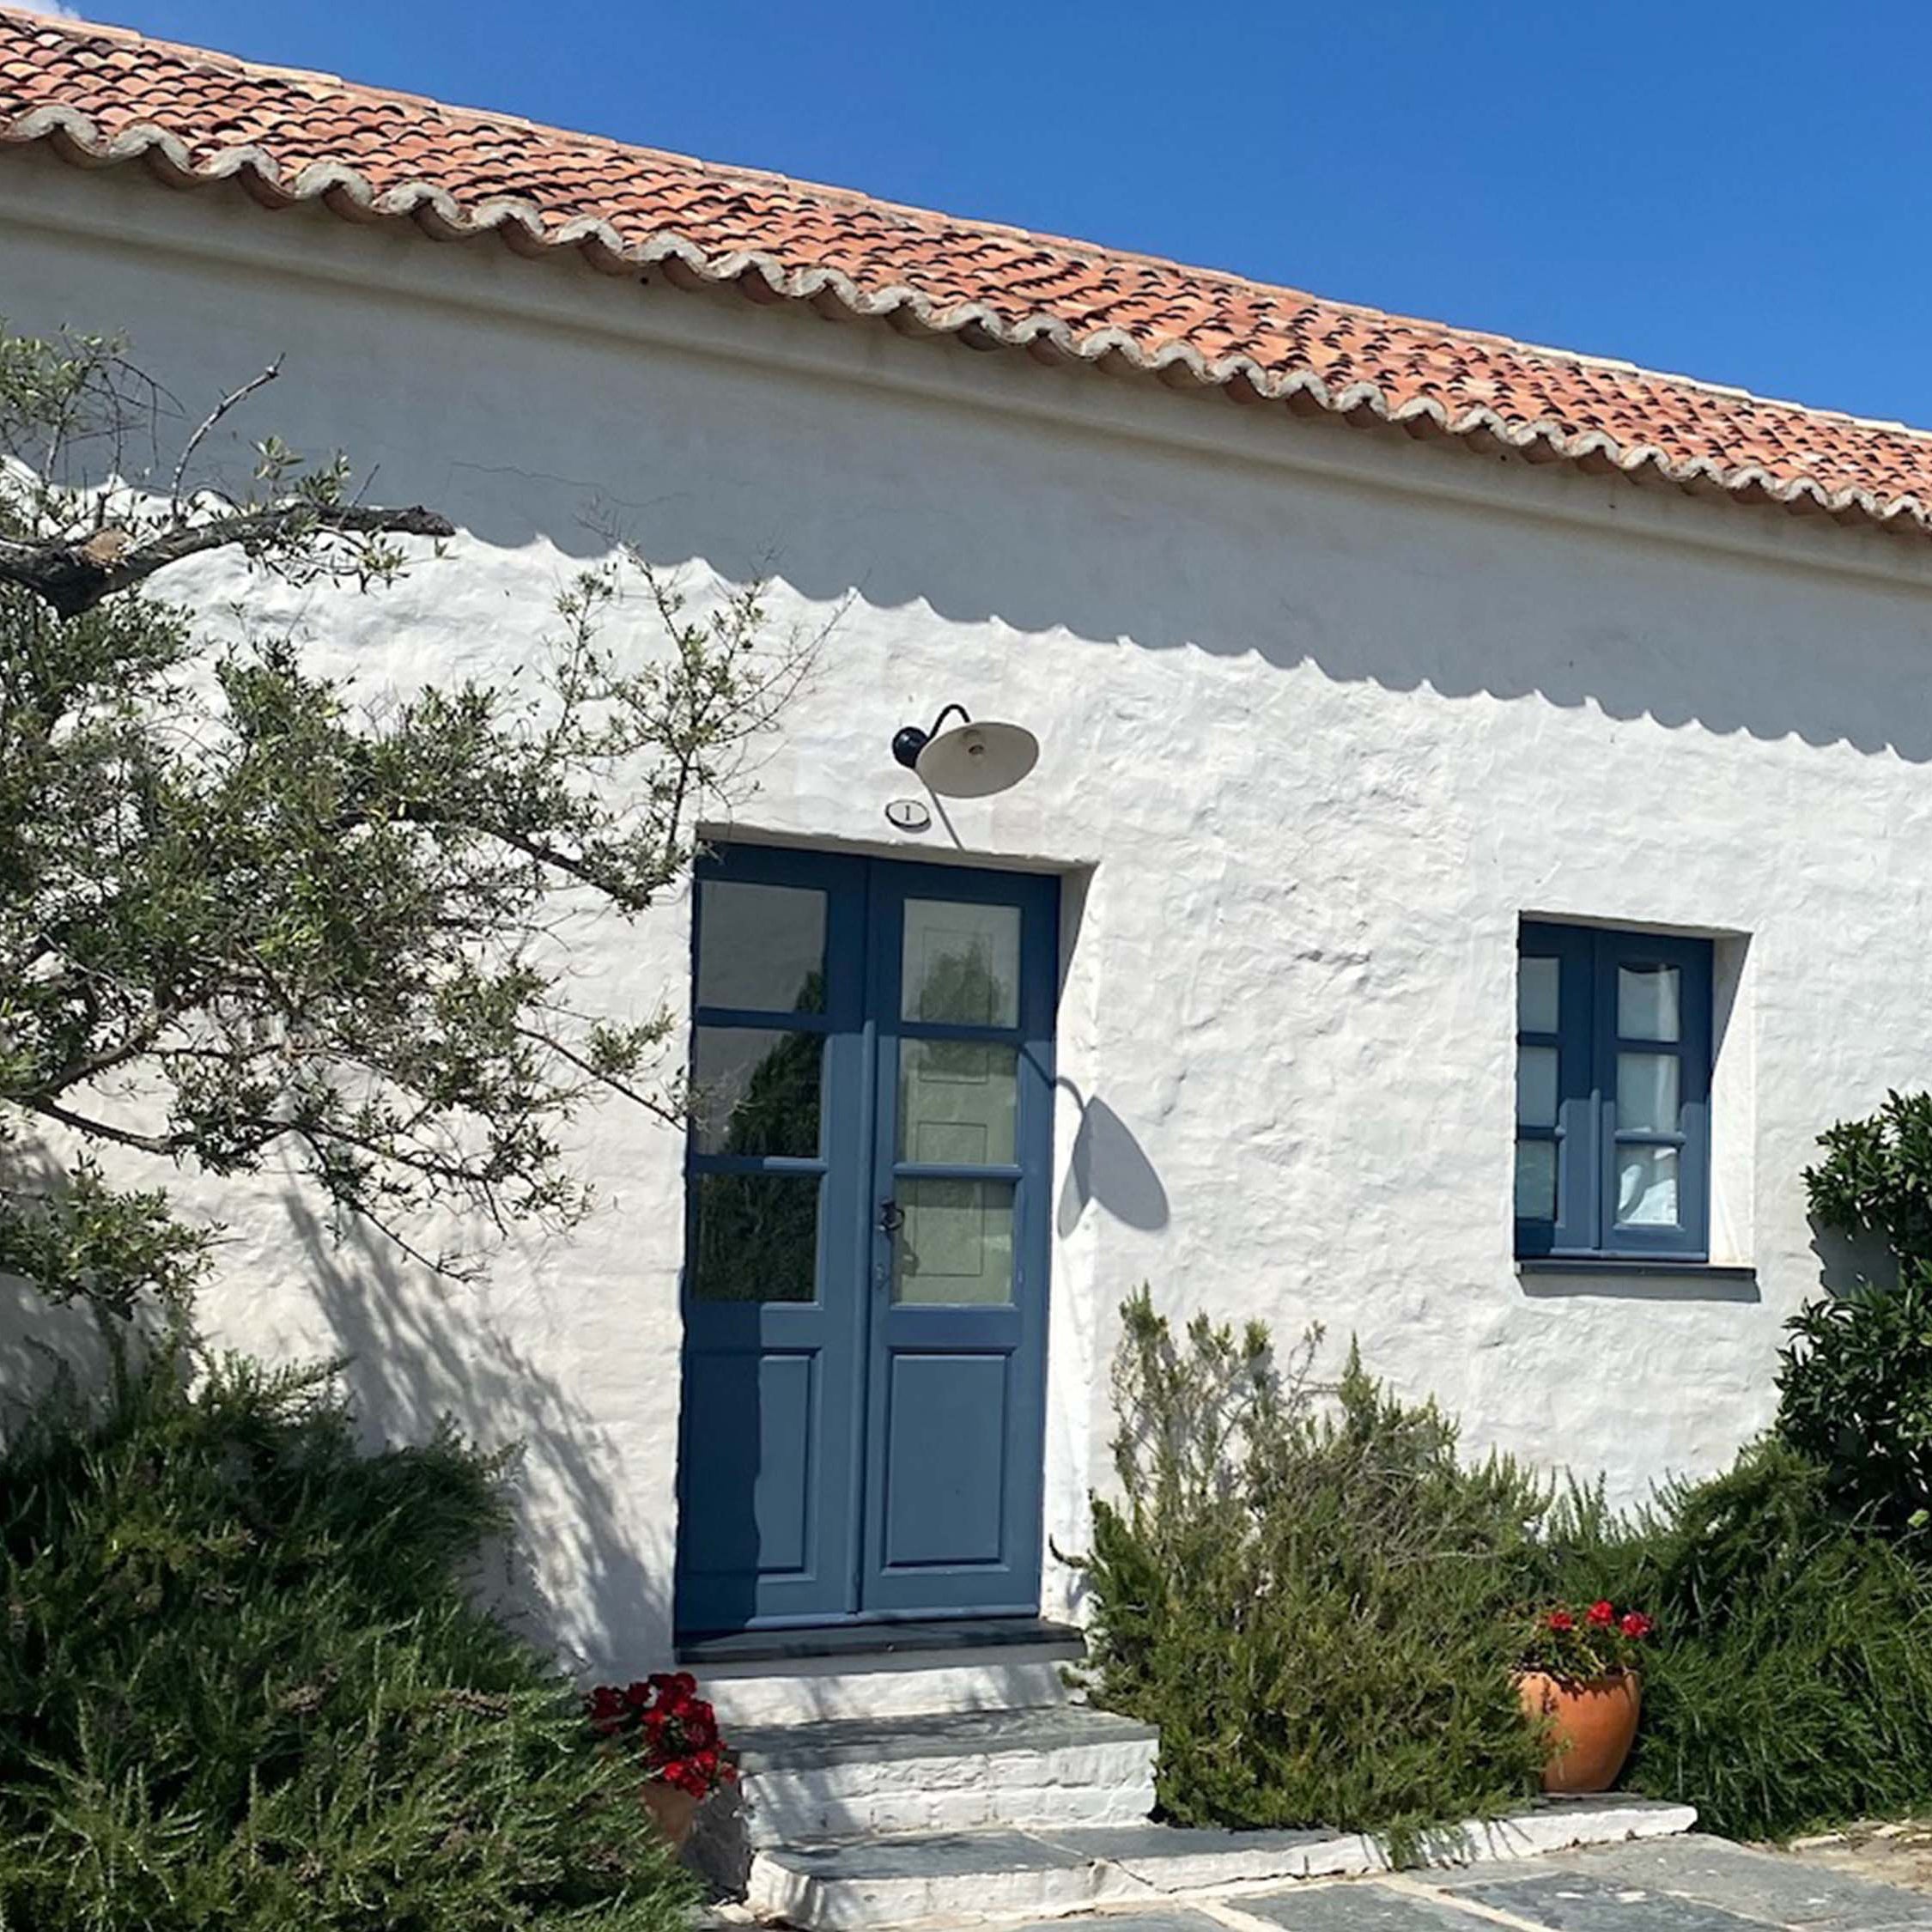 White stucco bungalow with tiled roof and blue door